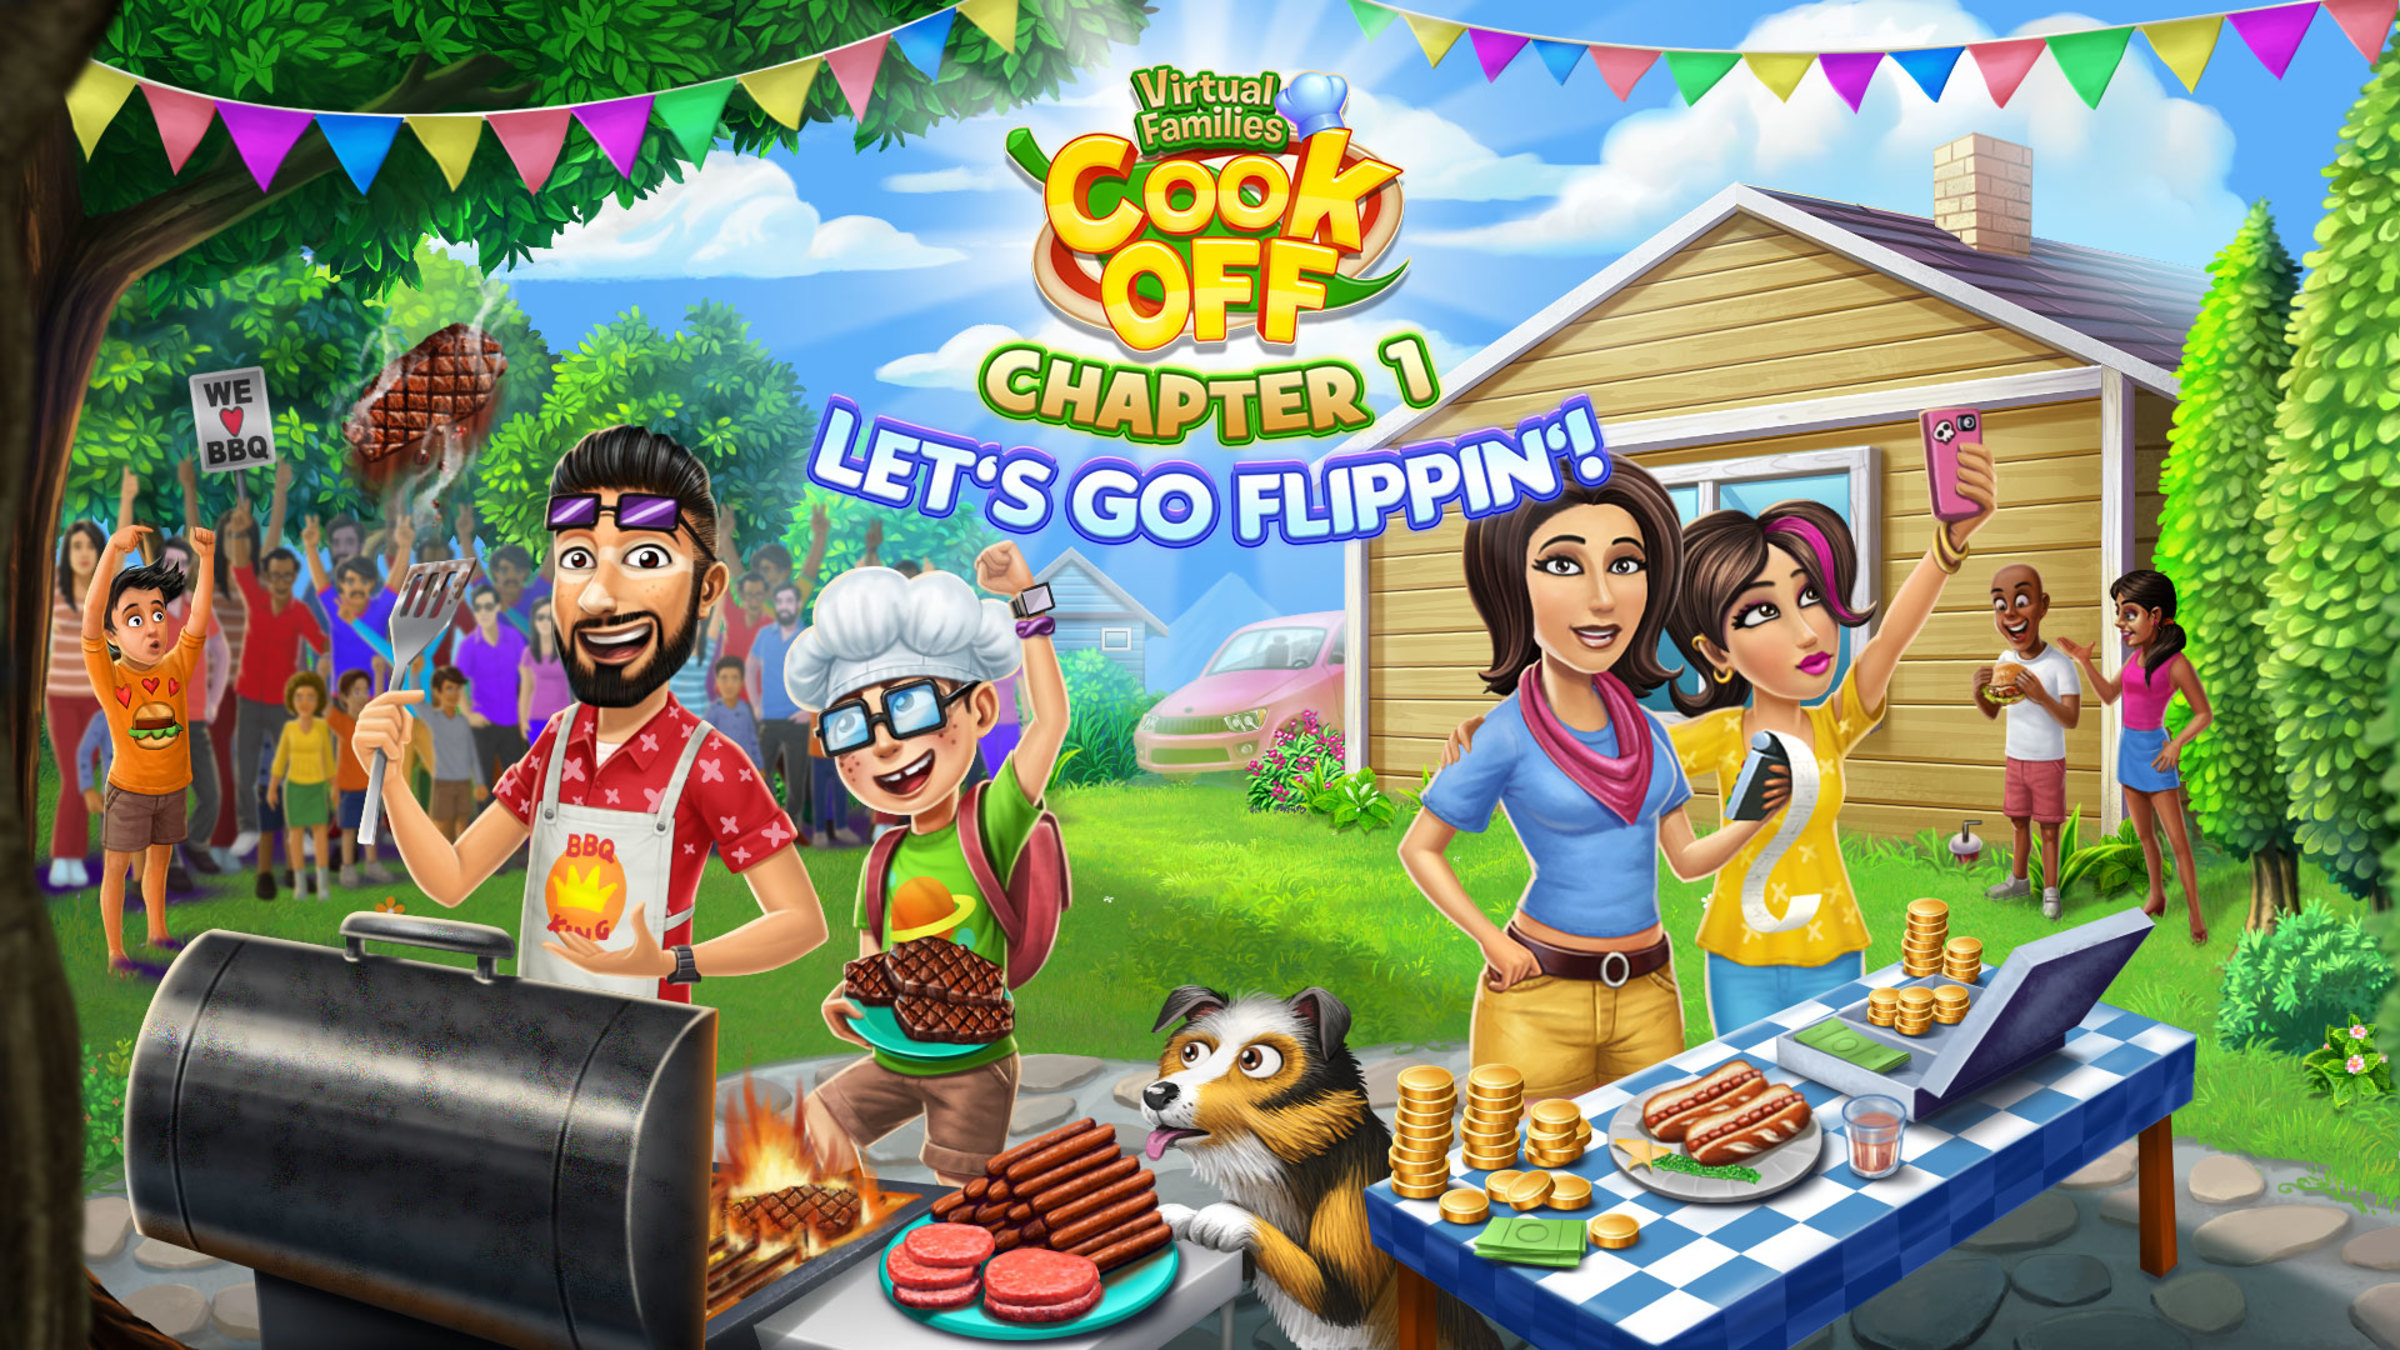 https://assets.nintendo.com/image/upload/c_fill,w_1200/q_auto:best/f_auto/dpr_2.0/ncom/en_US/games/switch/v/virtual-families-cook-off-chapter-1-lets-go-flippin-switch/